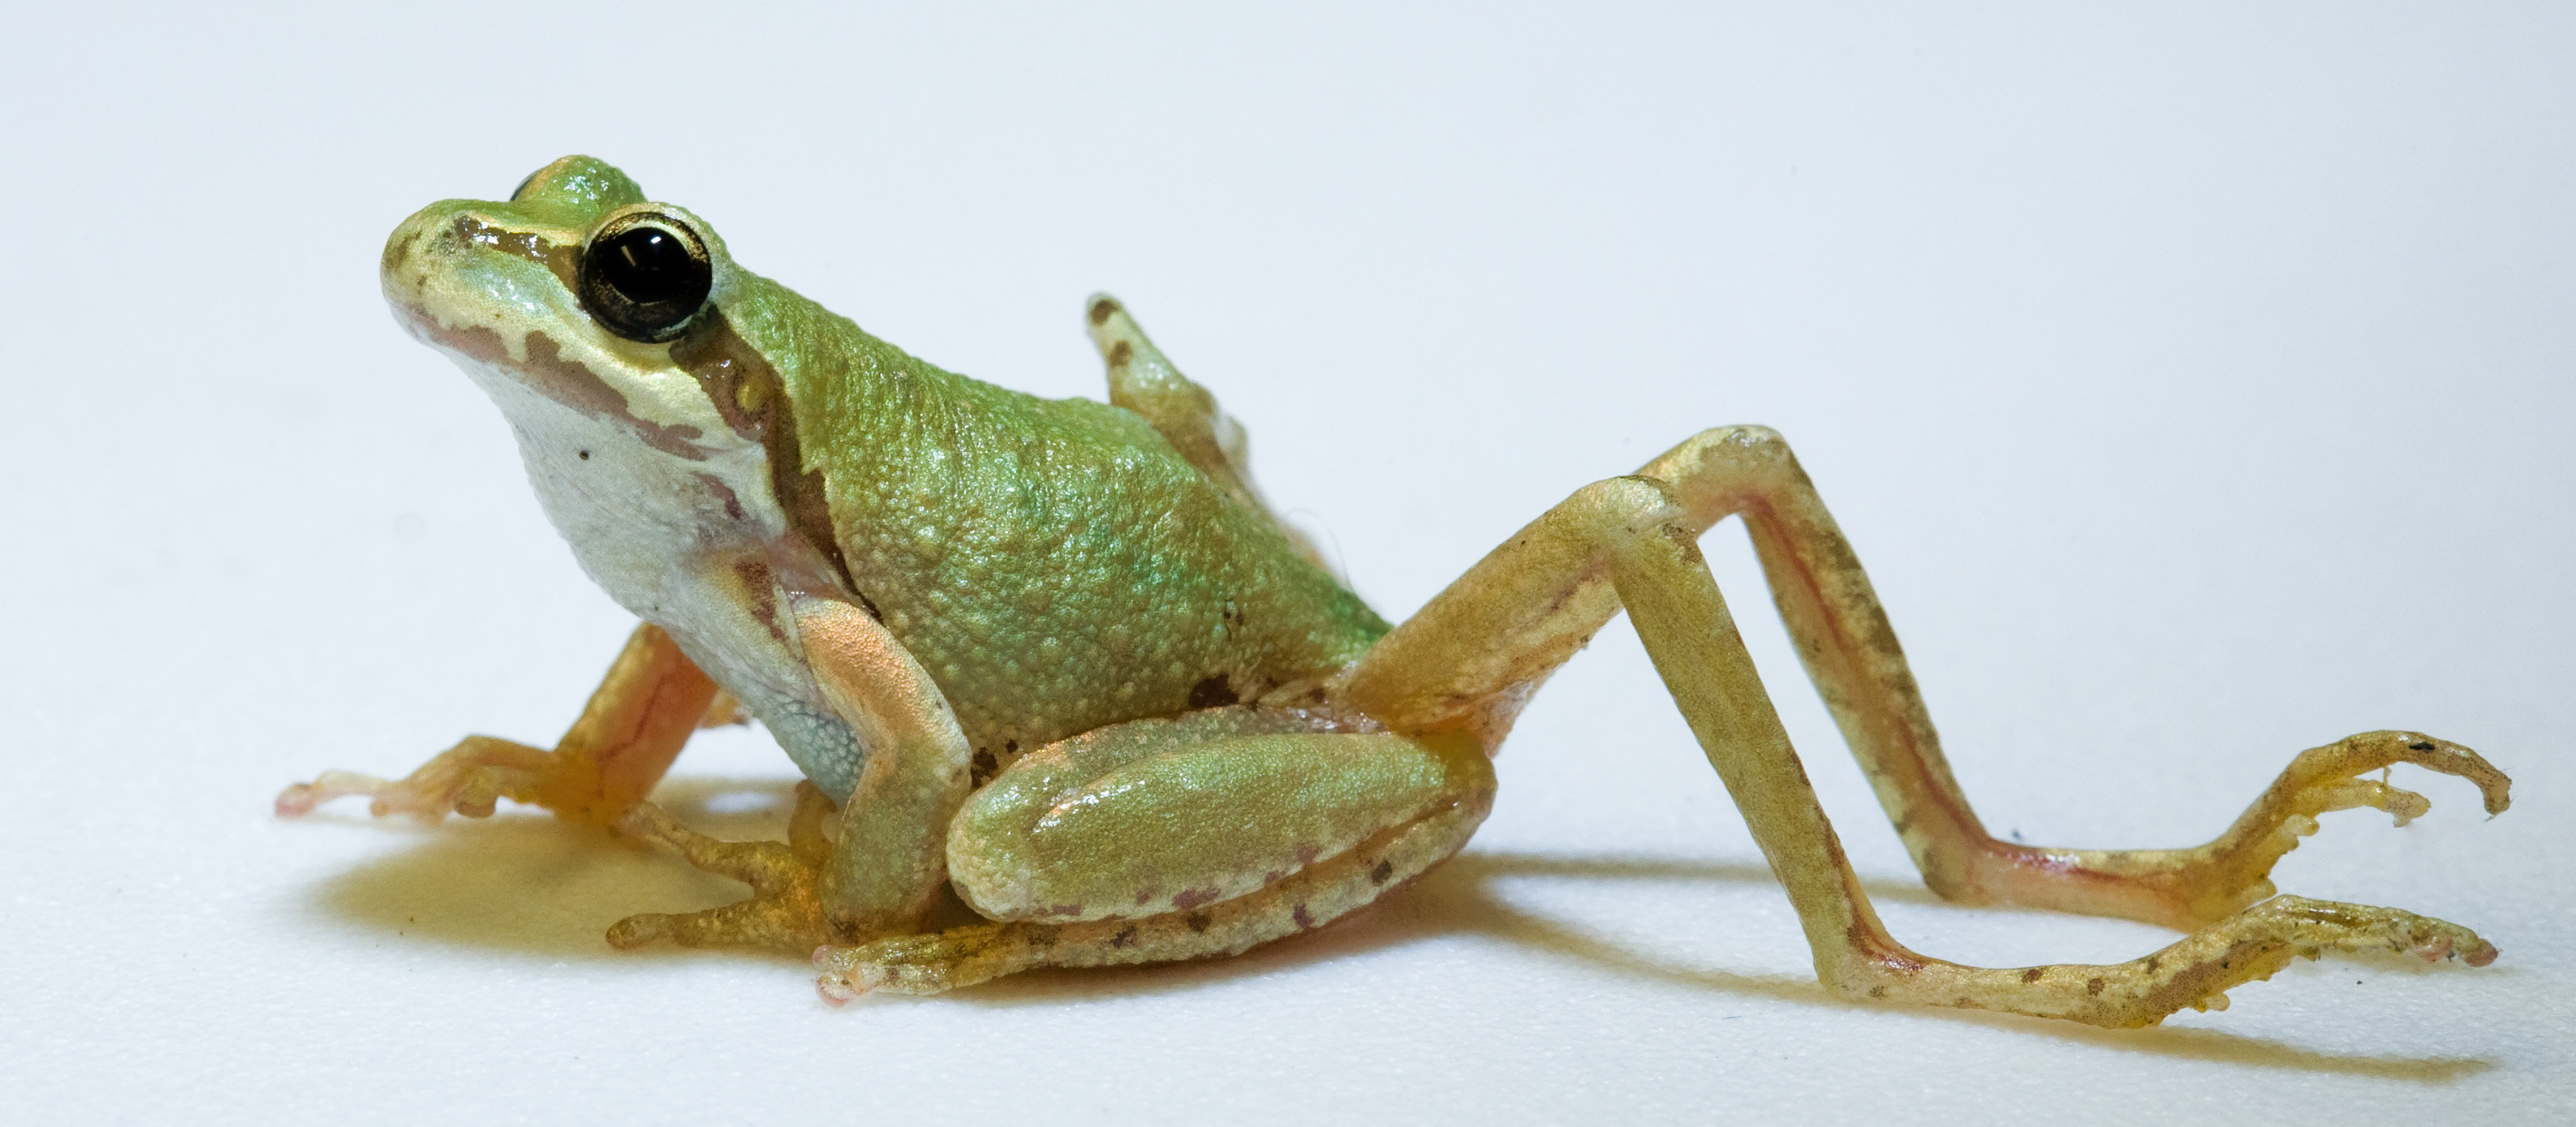 Photo of a Pacific chorus frog with an extra pair of hind legs. The extra legs appear to sprout from the frog's left hip. They are long and skinny and drag behind the frog.